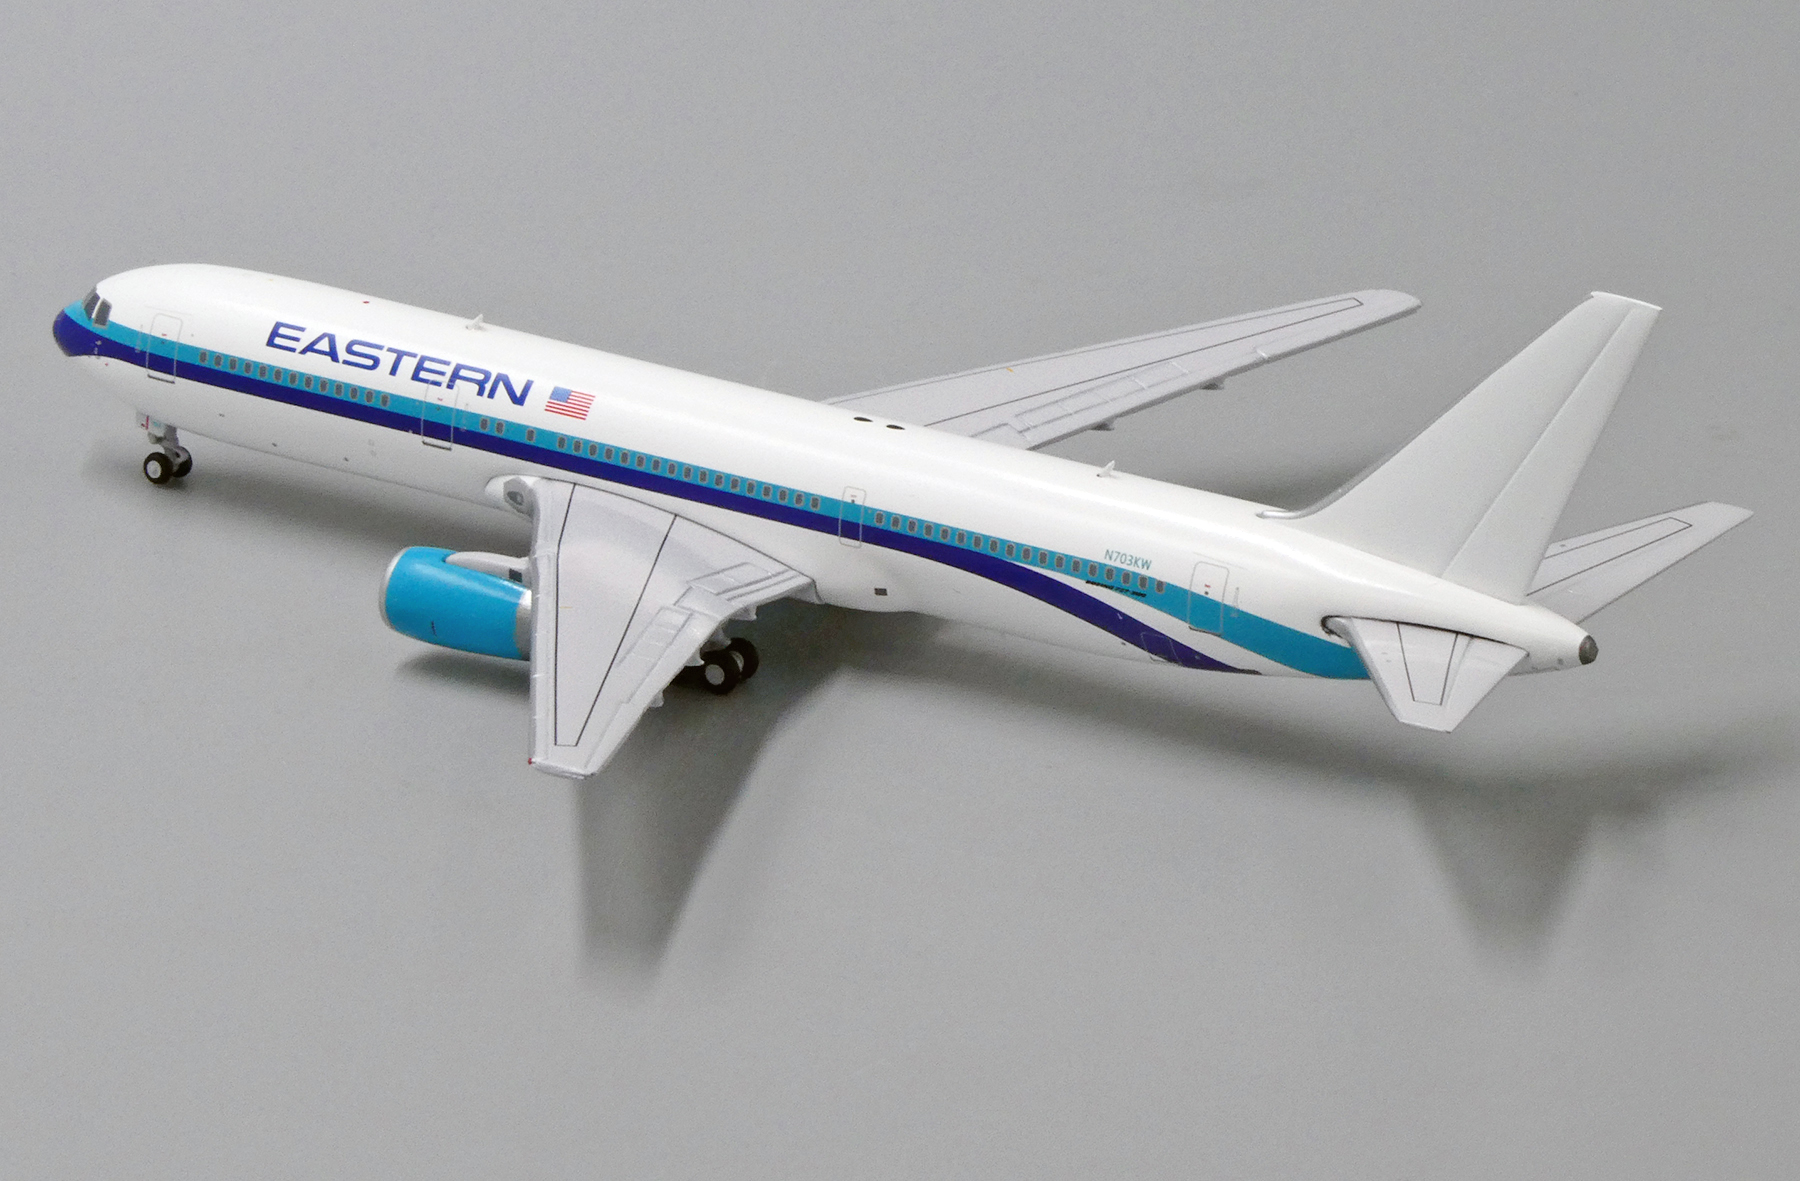 Details about   JC Wings 1:400 scale diecast model Eastern B 767-3ER Commercial Airliner N703KW 